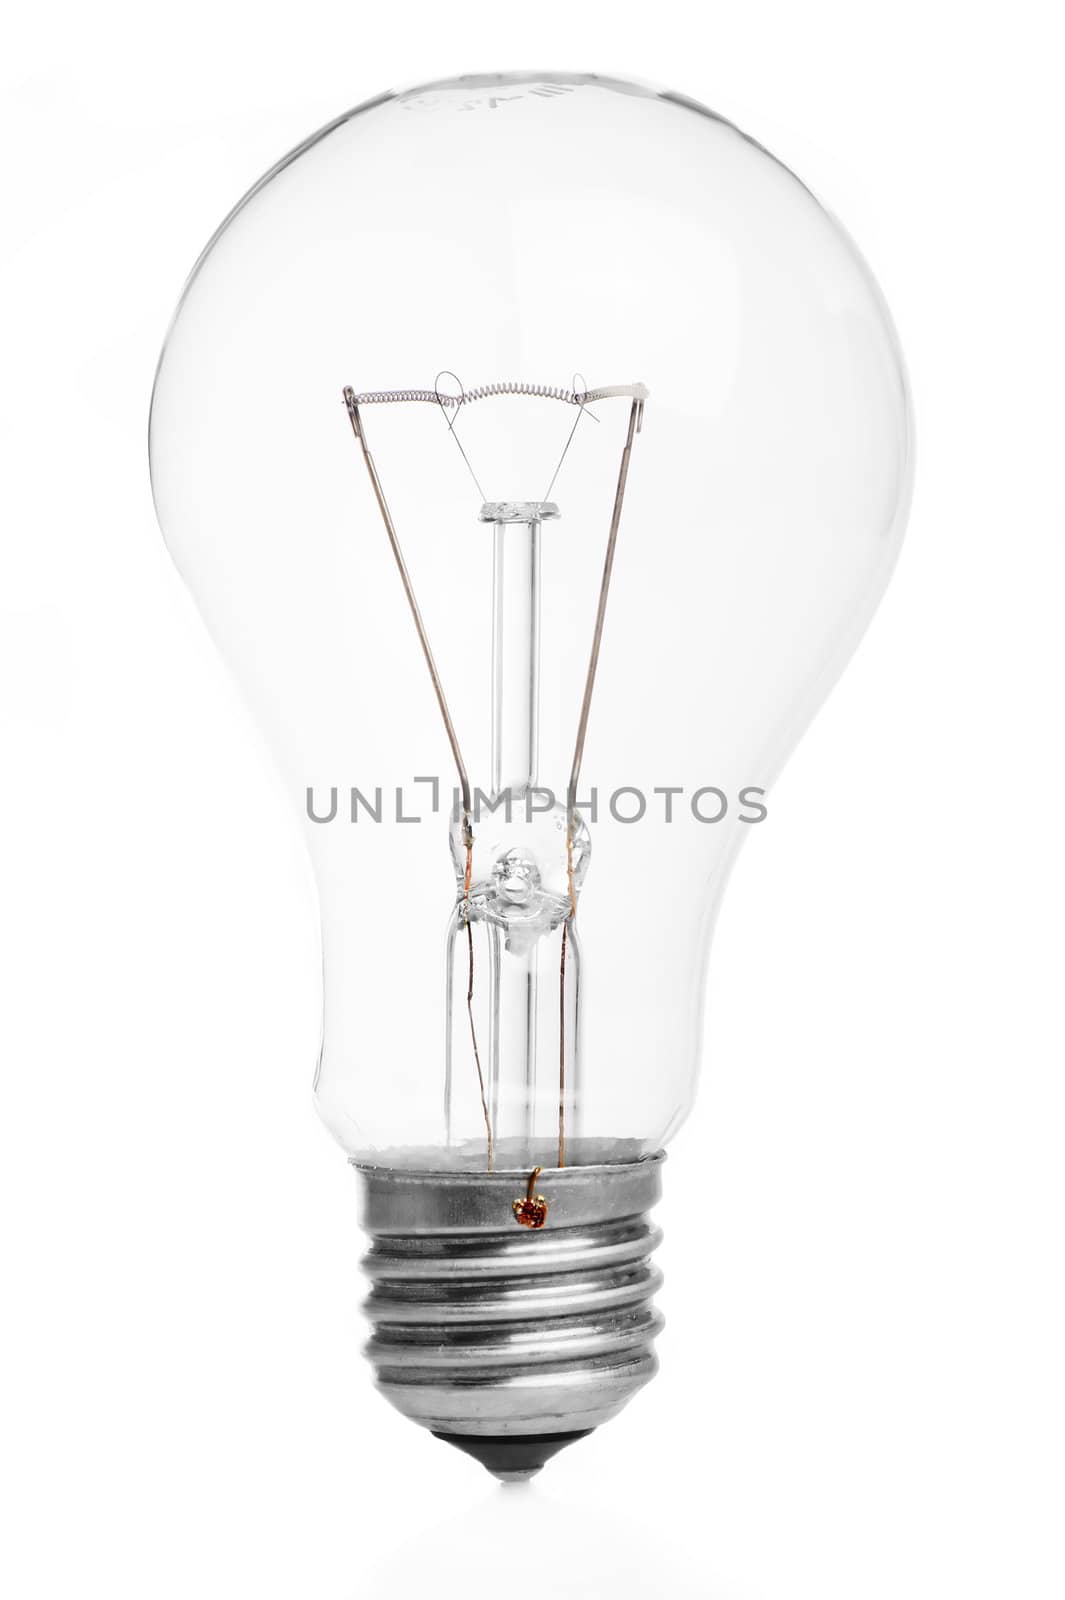 A light bulb on white background. by kosmsos111